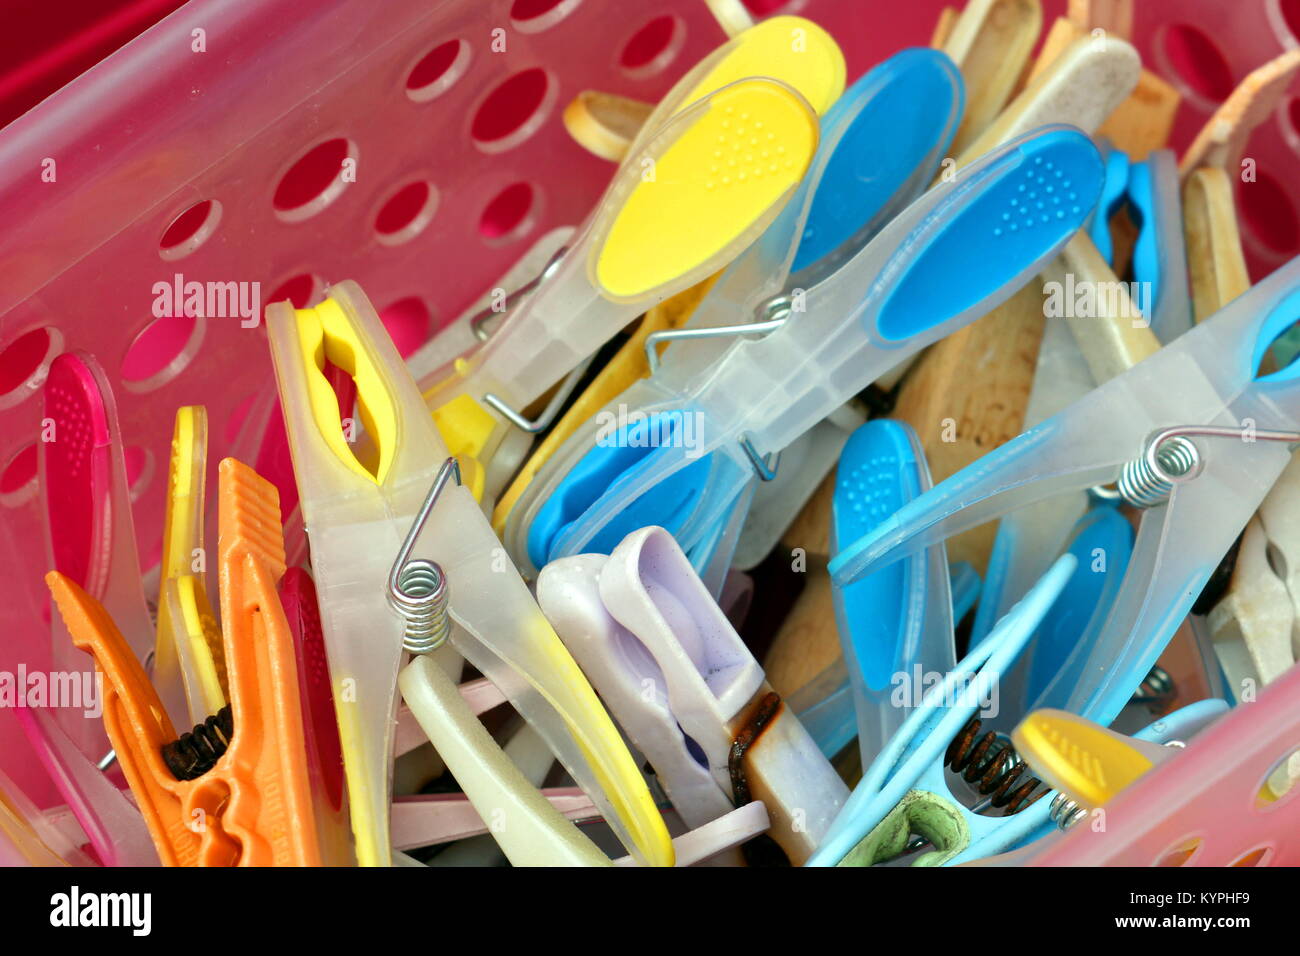 Closeup of brightly coloured clothes pegs or clothespins in a plastic container Stock Photo